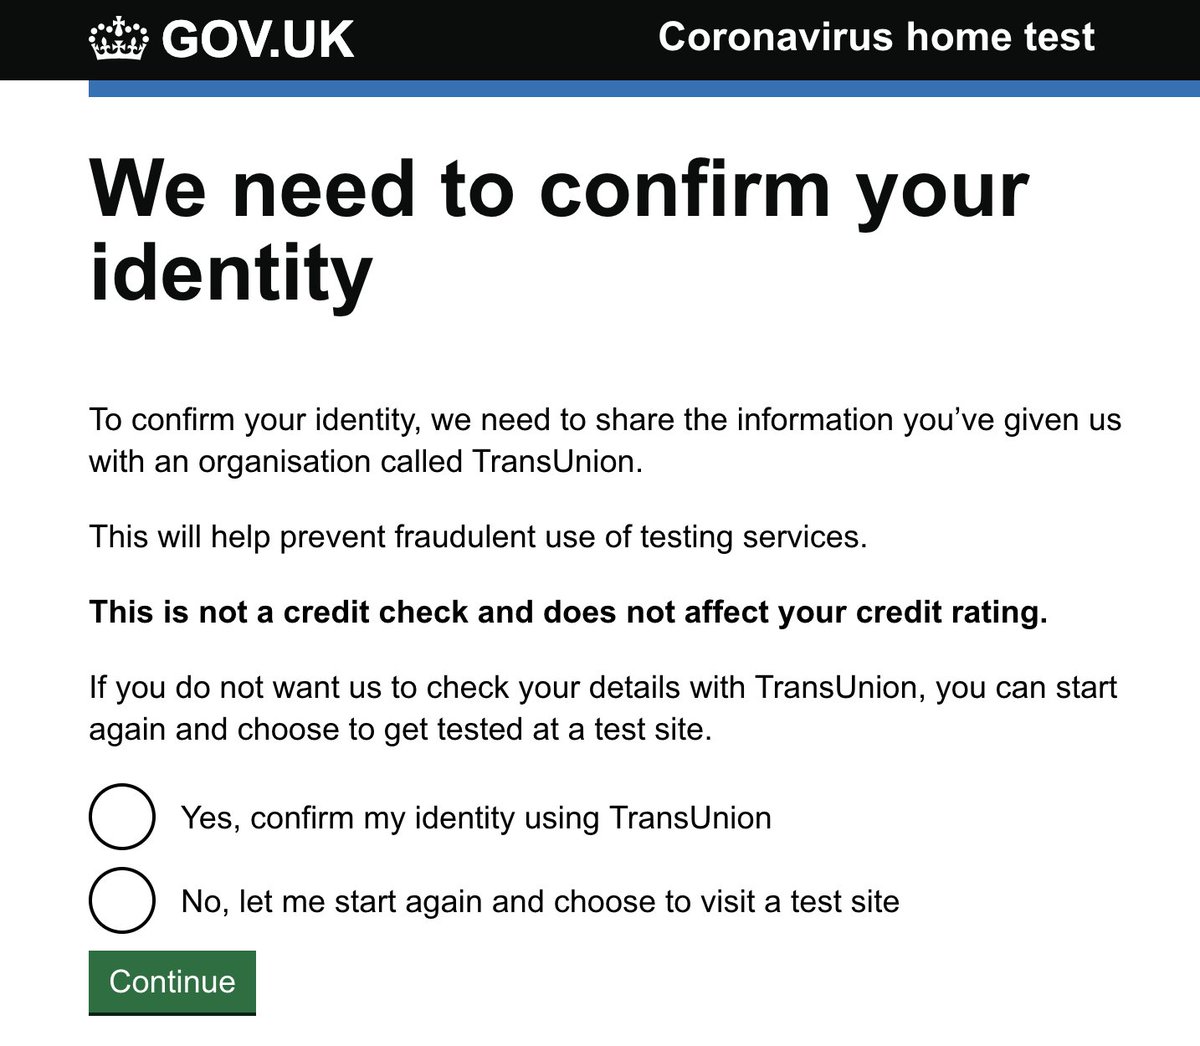 Woke up a slight sore throat so thought I'd do the right thing & get a Covid test. Official  http://Gov.uk  website now demanding I share my information with an American Credit Check Company. No way that's good news.